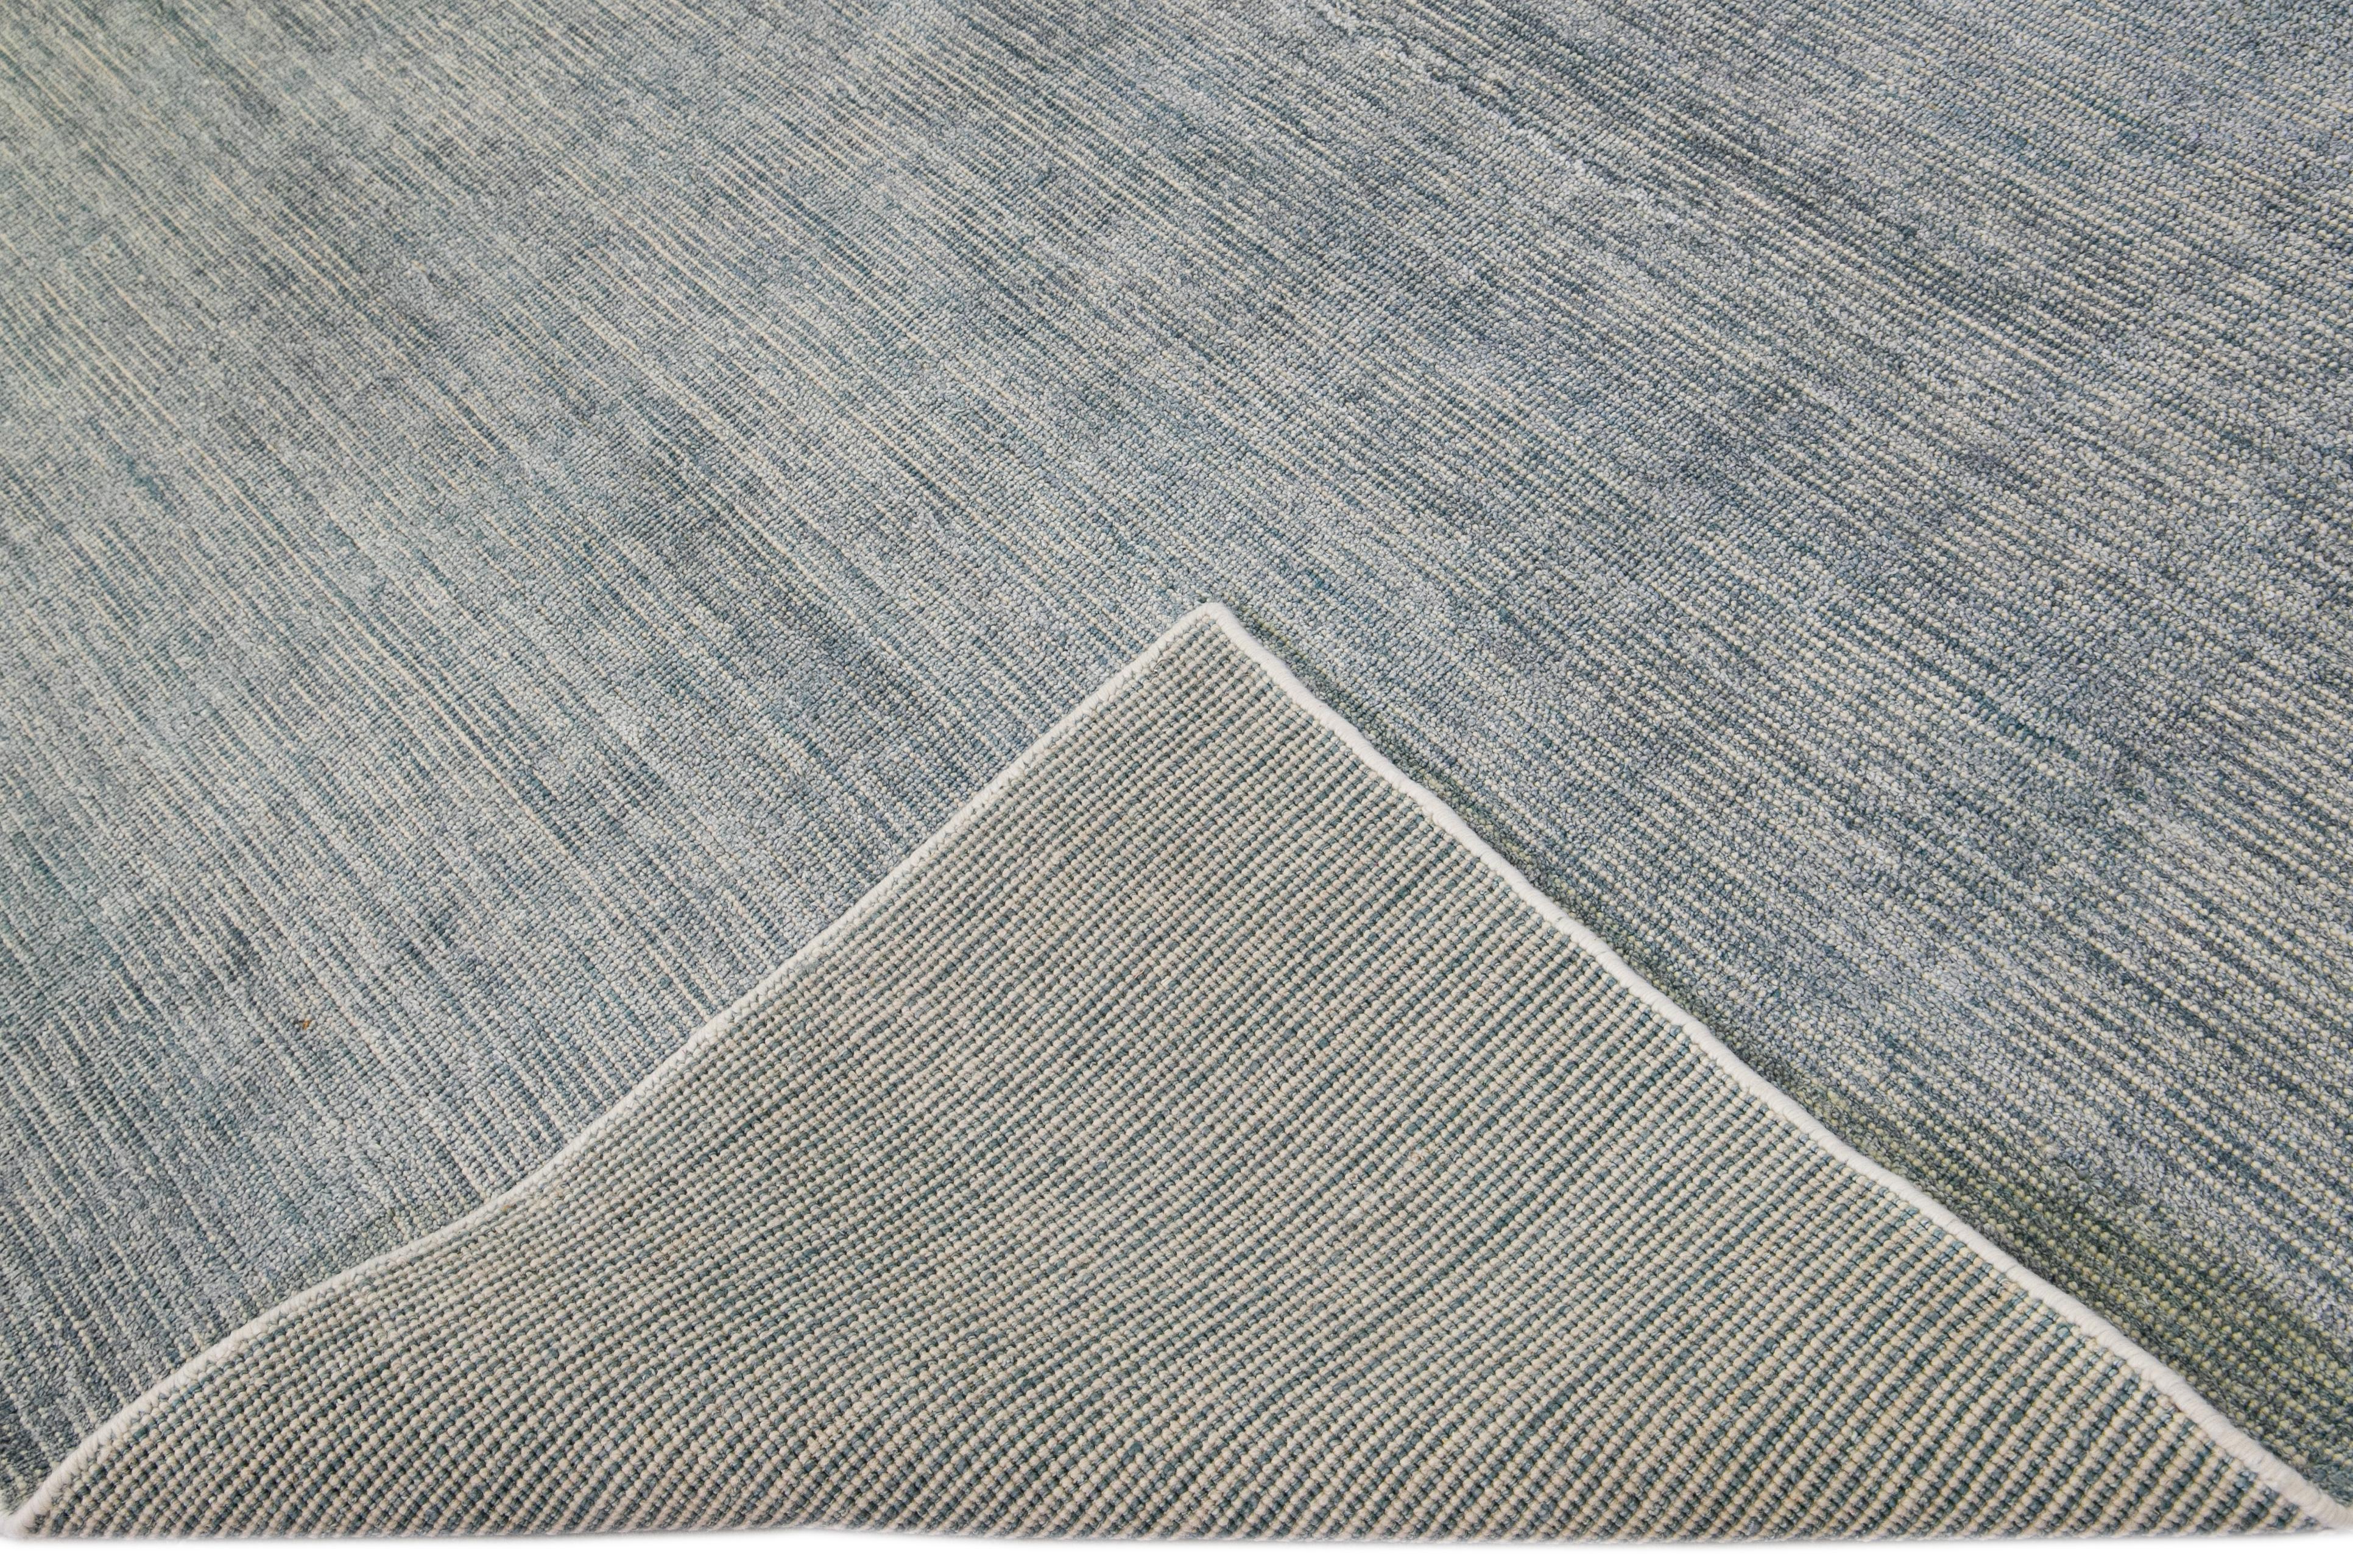 Beautiful modern handmade Indian bamboo and silk Groove rug with a blue and gray field. This Boho collection rug has an all-over solid design.

This rug measures: 8' x 10'.

Custom colors and sizes are available upon request.

